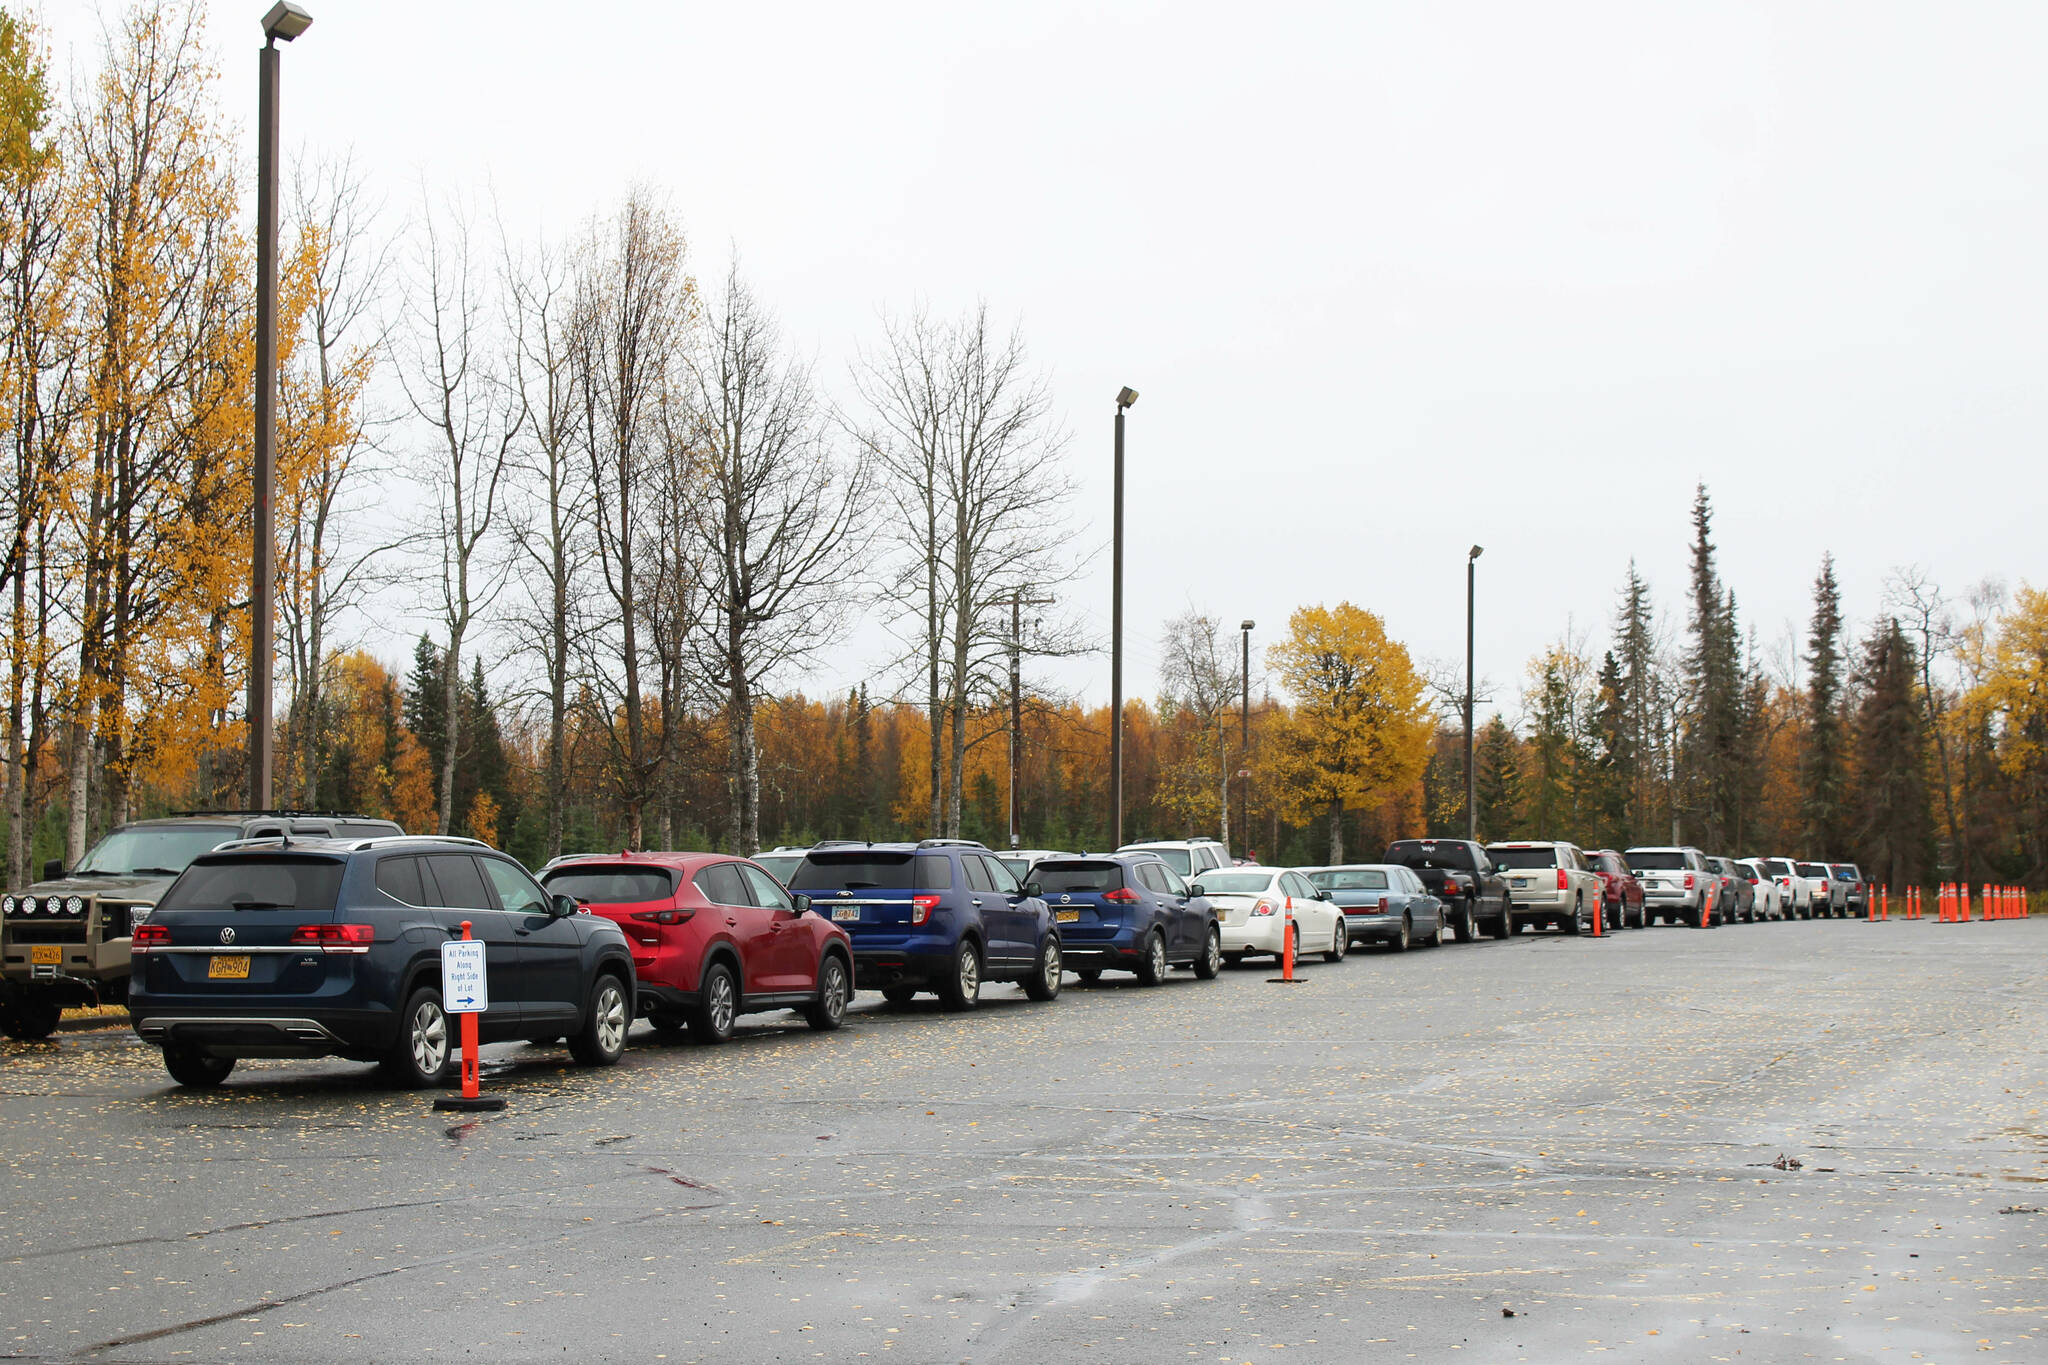 Cars line up ahead of dismissal at Mountain View Elementary School on Thursday, September 29, 2022, in Kenai, Alaska. A bond package up for consideration by Kenai Peninsula Borough voters on Oct. 4 would fund improvements to the school’s traffic flow. (Ashlyn O’Hara/Peninsula Clarion)